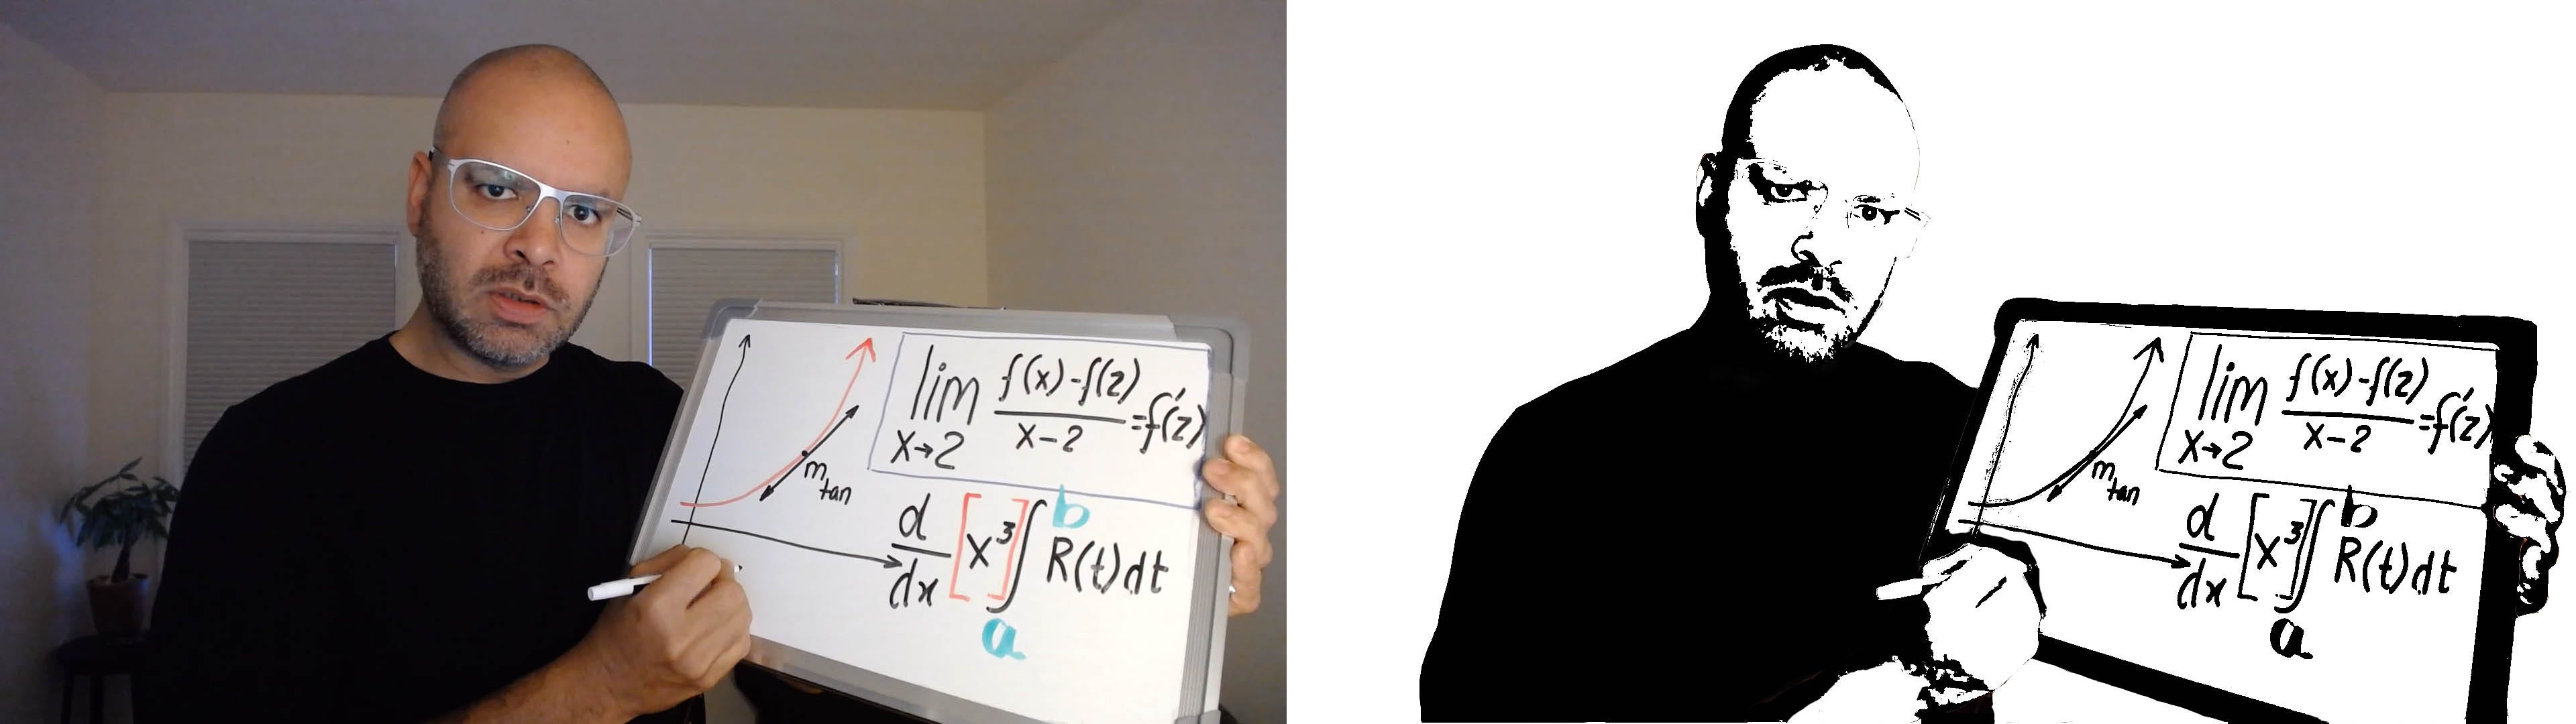 A person holding a whiteboard with the color image on left and a black-and-white photo on the right.